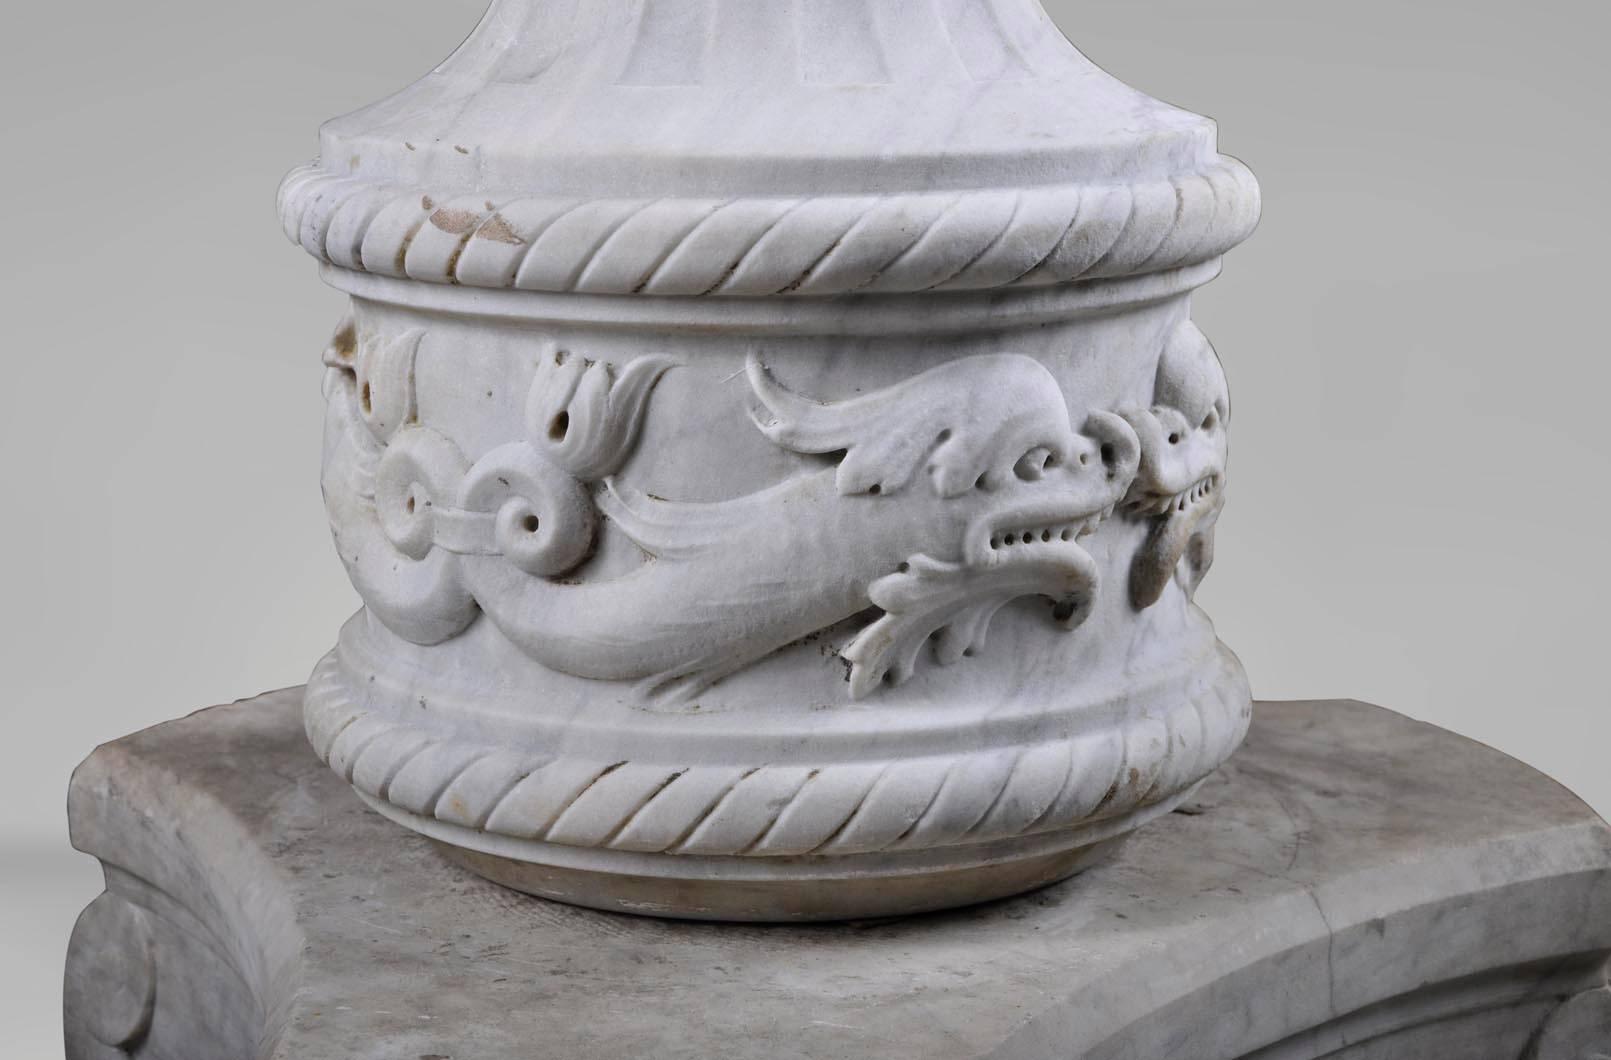 Beautiful Carrara marble fountain with a decor of dolphins and fruit garland. This Renaissance Revival piece is a very elegant ornament for a garden or a winter garden.